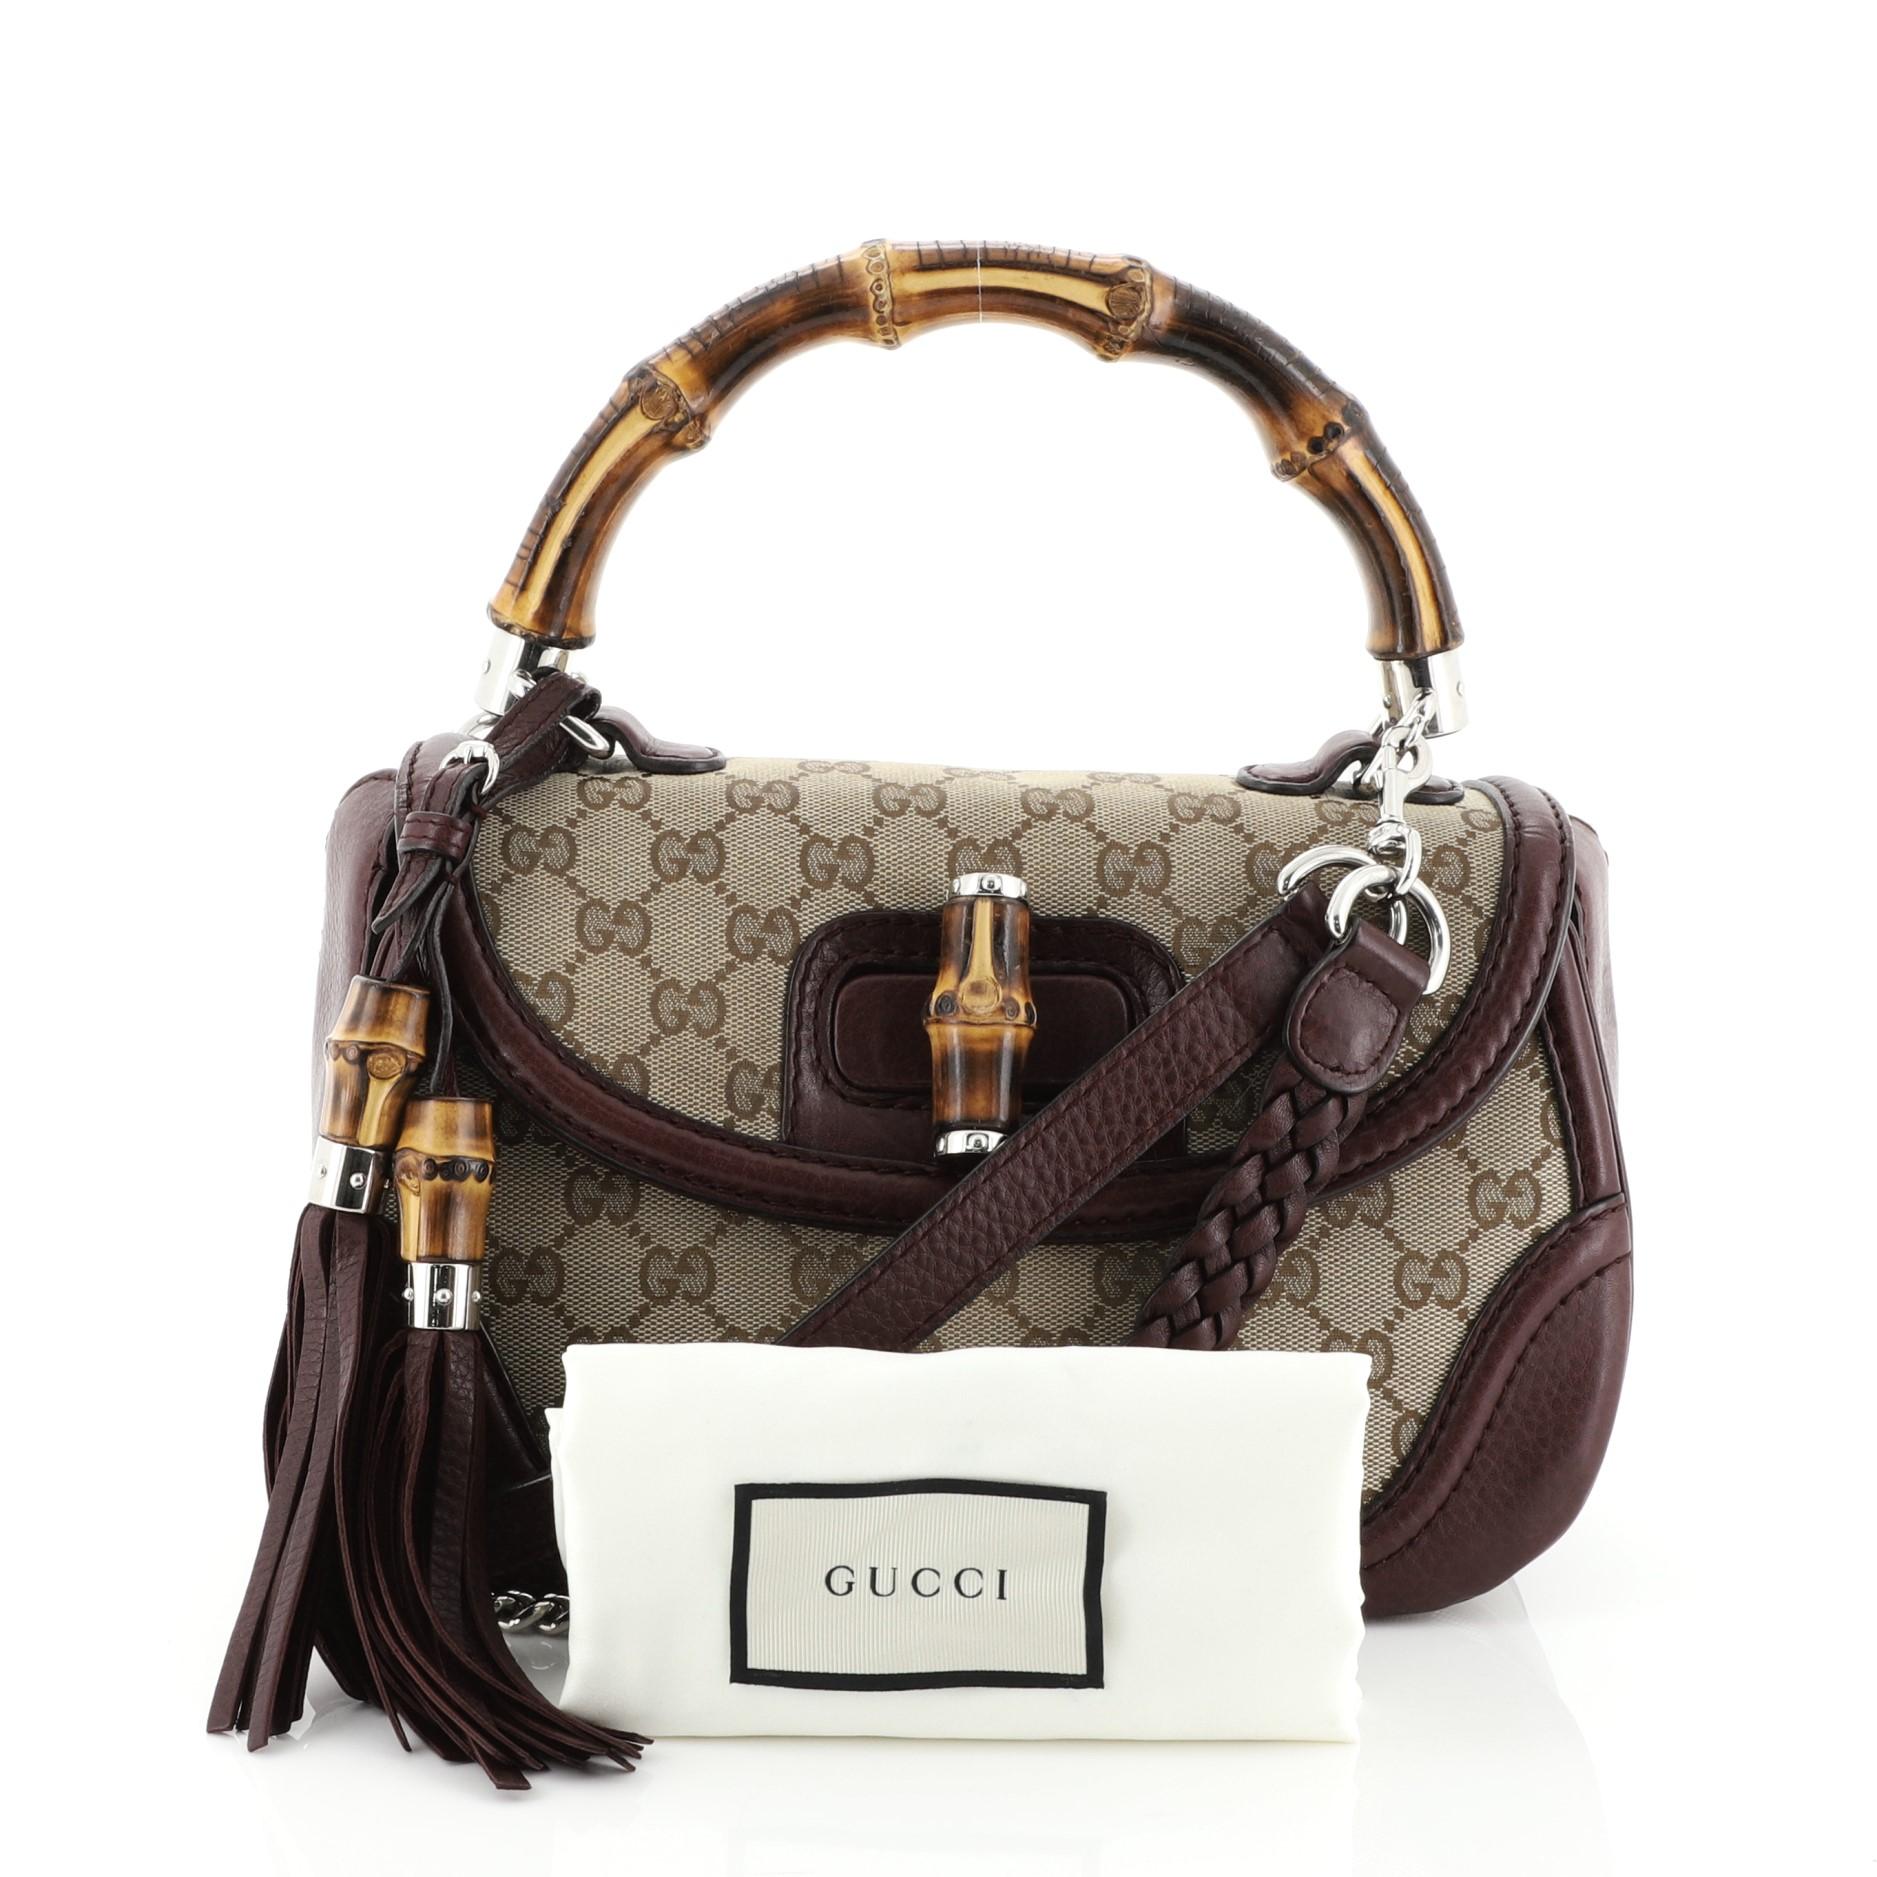 This Gucci New Bamboo Top Handle Bag GG Canvas Medium, crafted in neutral GG canvas and purple leather, features a bamboo top handle and silver-tone hardware. Its bamboo turn-lock closure opens to a neutral fabric interior with side zip and slip